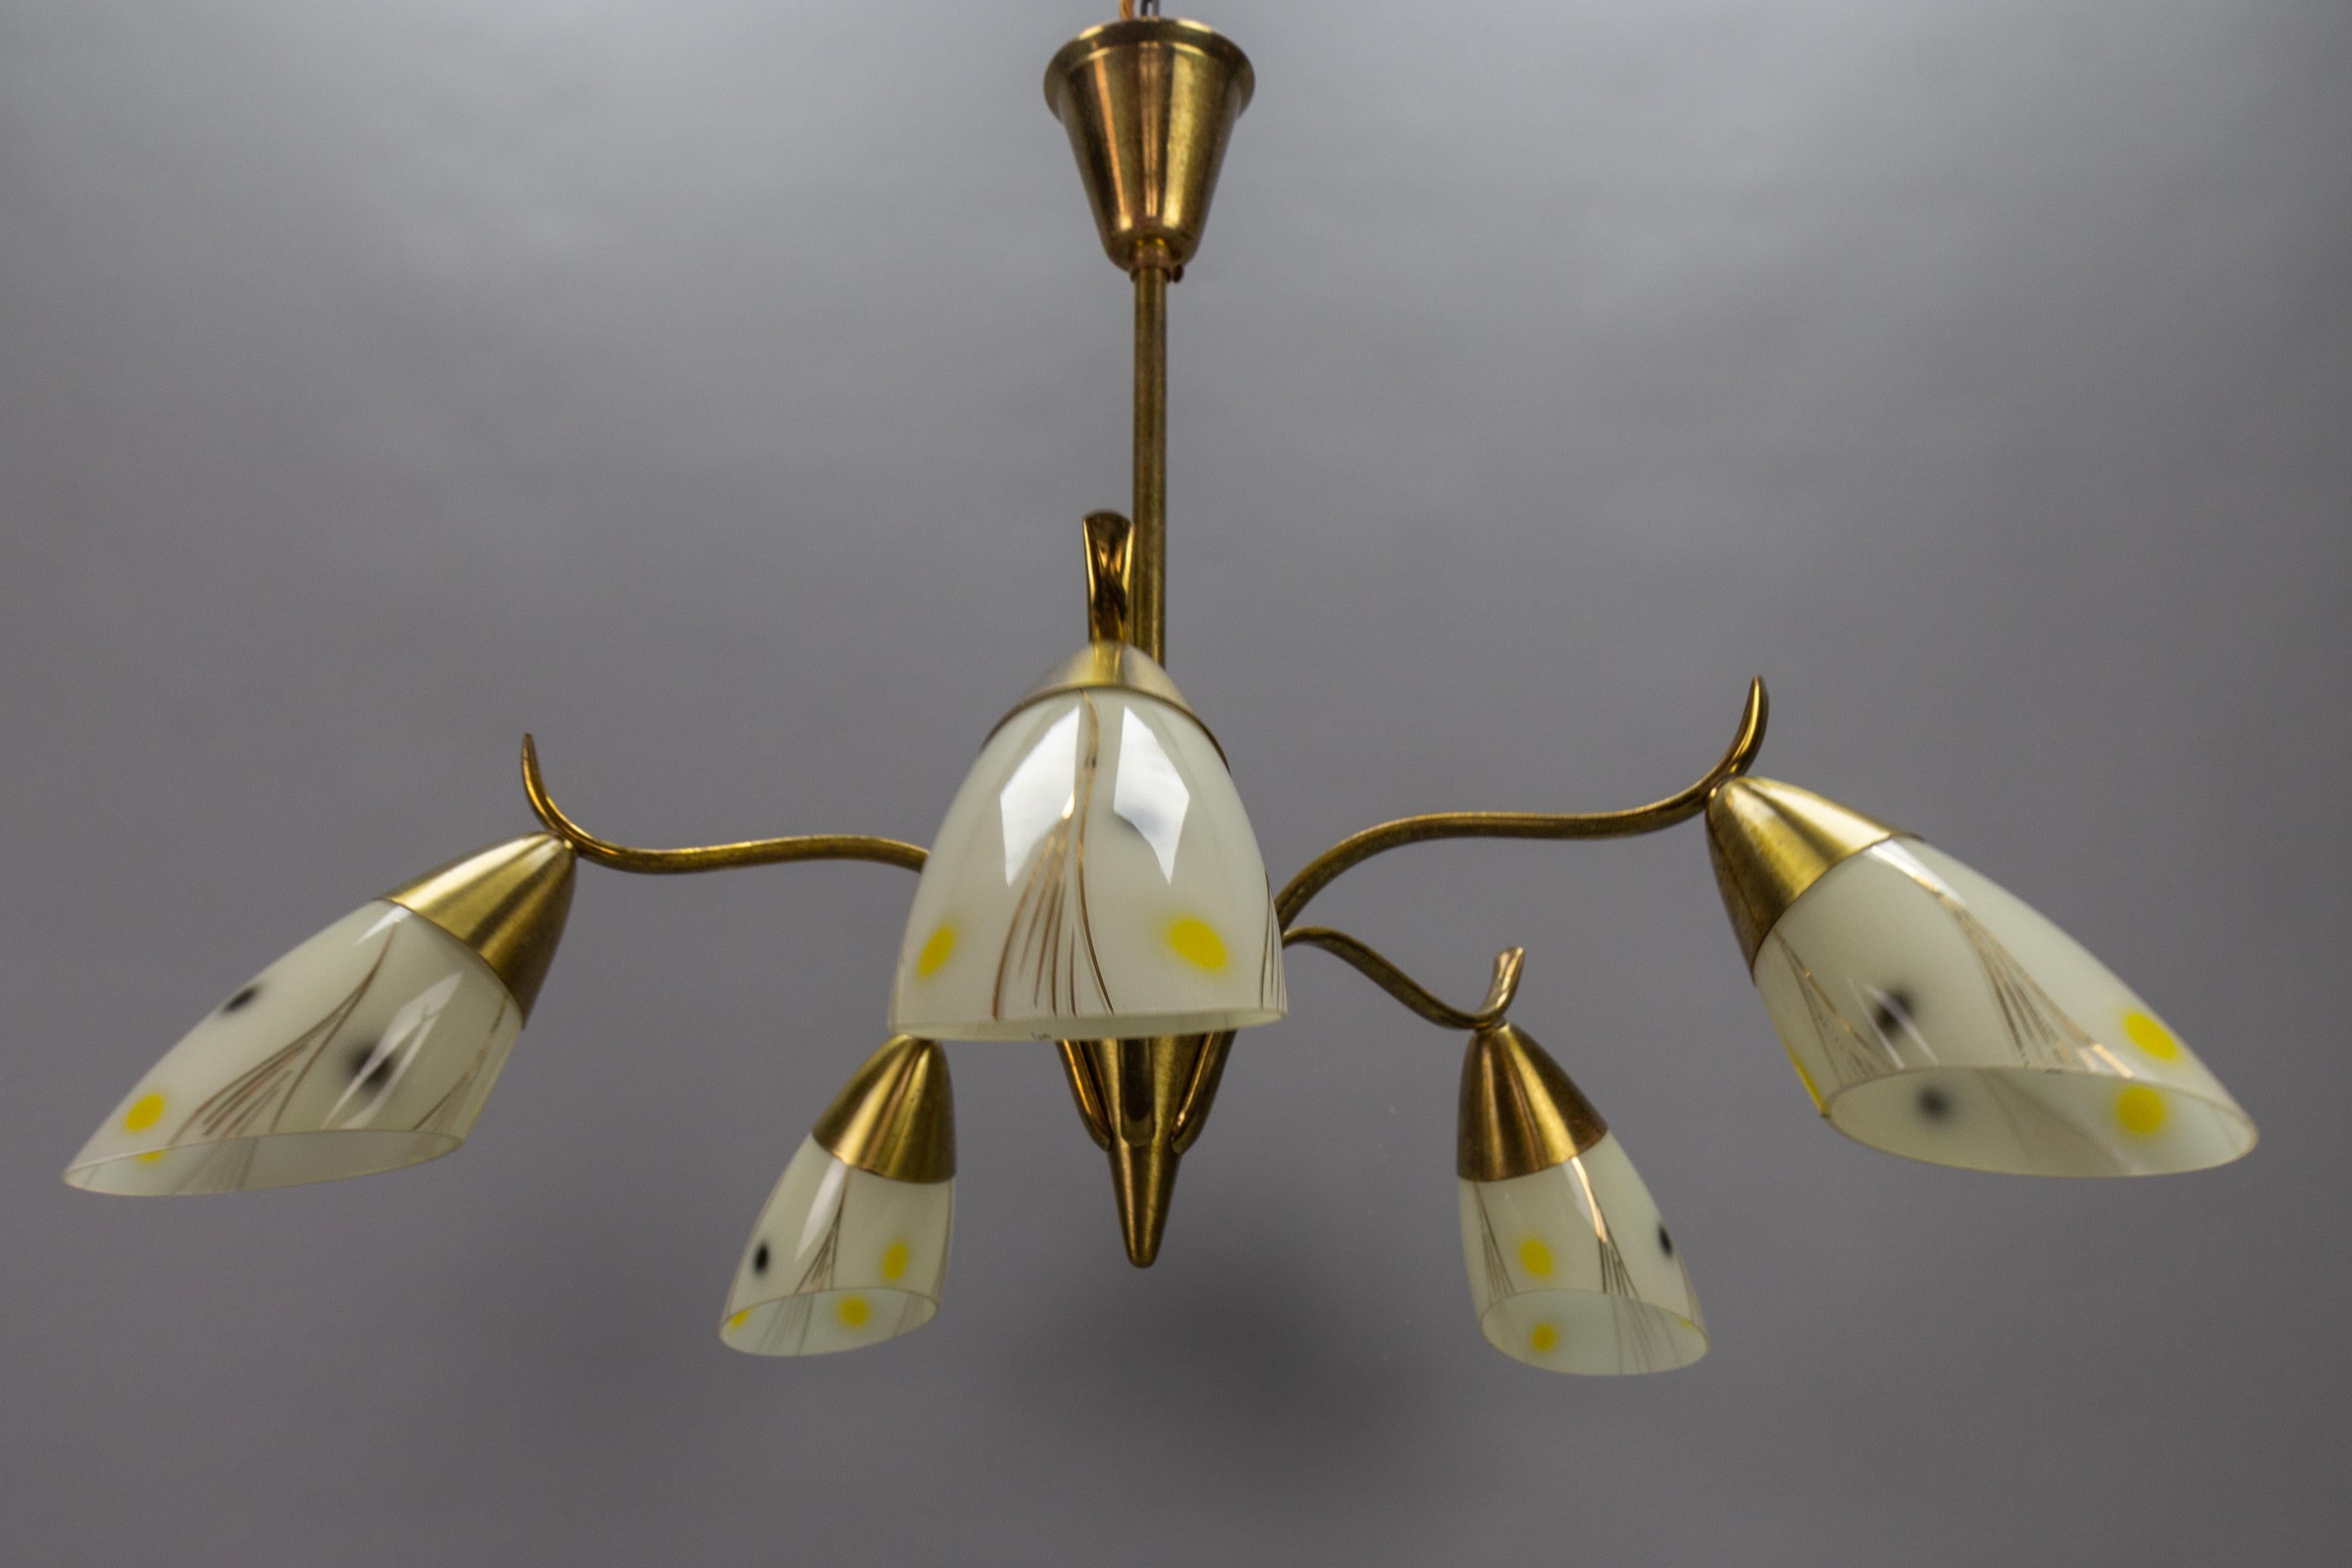 Mid-Century Modern brass and glass five-light Sputnik chandelier, Germany, circa the 1950s.
This adorable vintage Rockabilly chandelier features a brass and metal frame with five arms, each with an ivory-colored glass bag-shaped lampshade, adorned